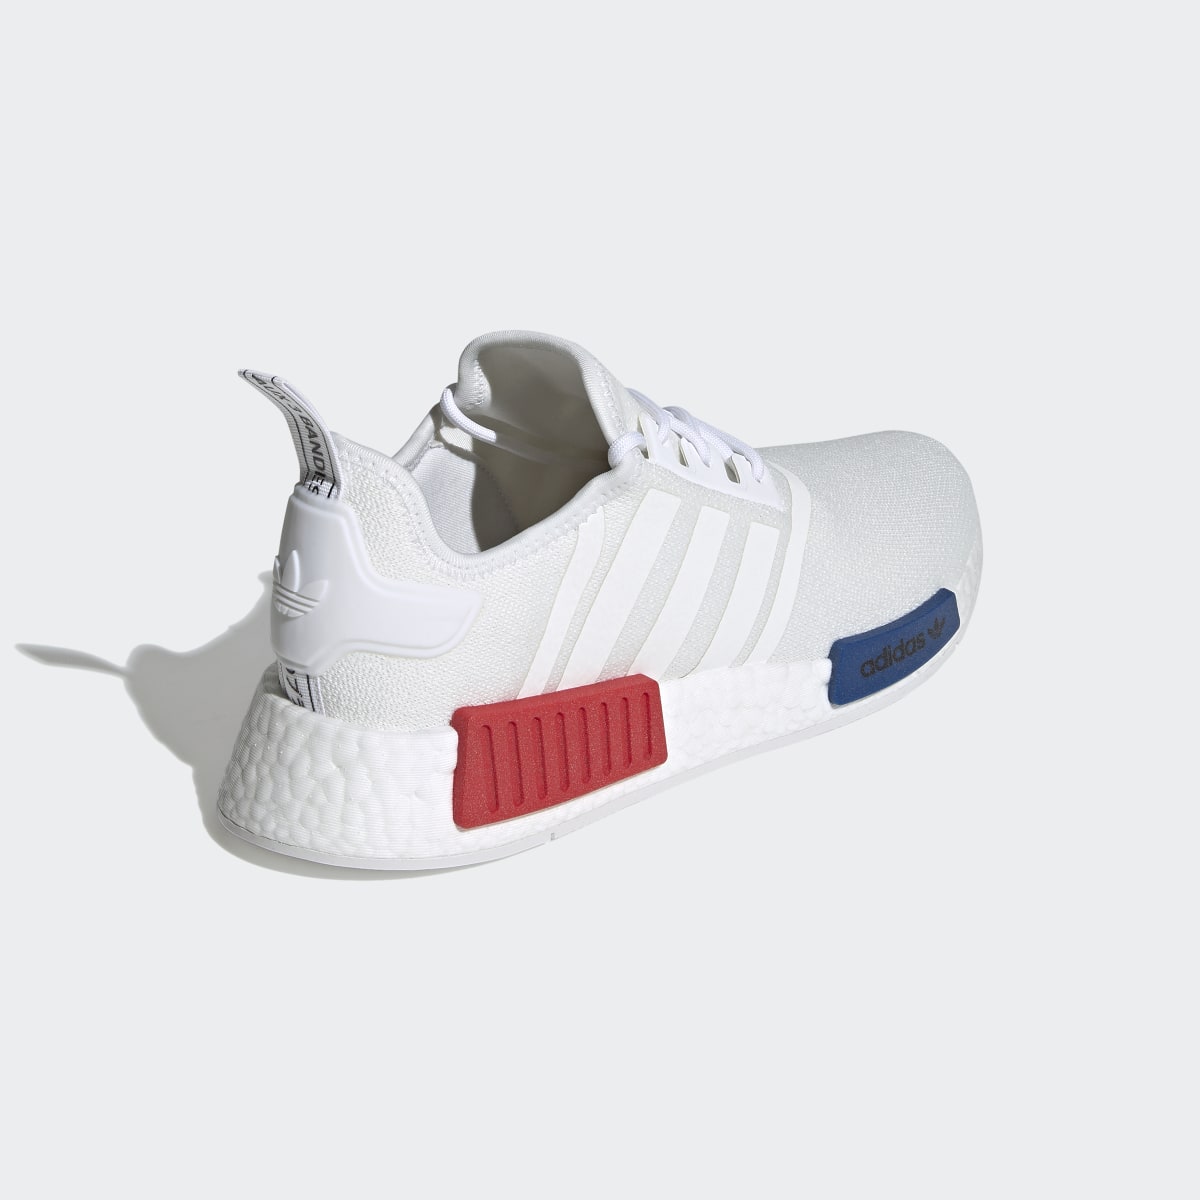 Adidas NMD_R1 Shoes. 6